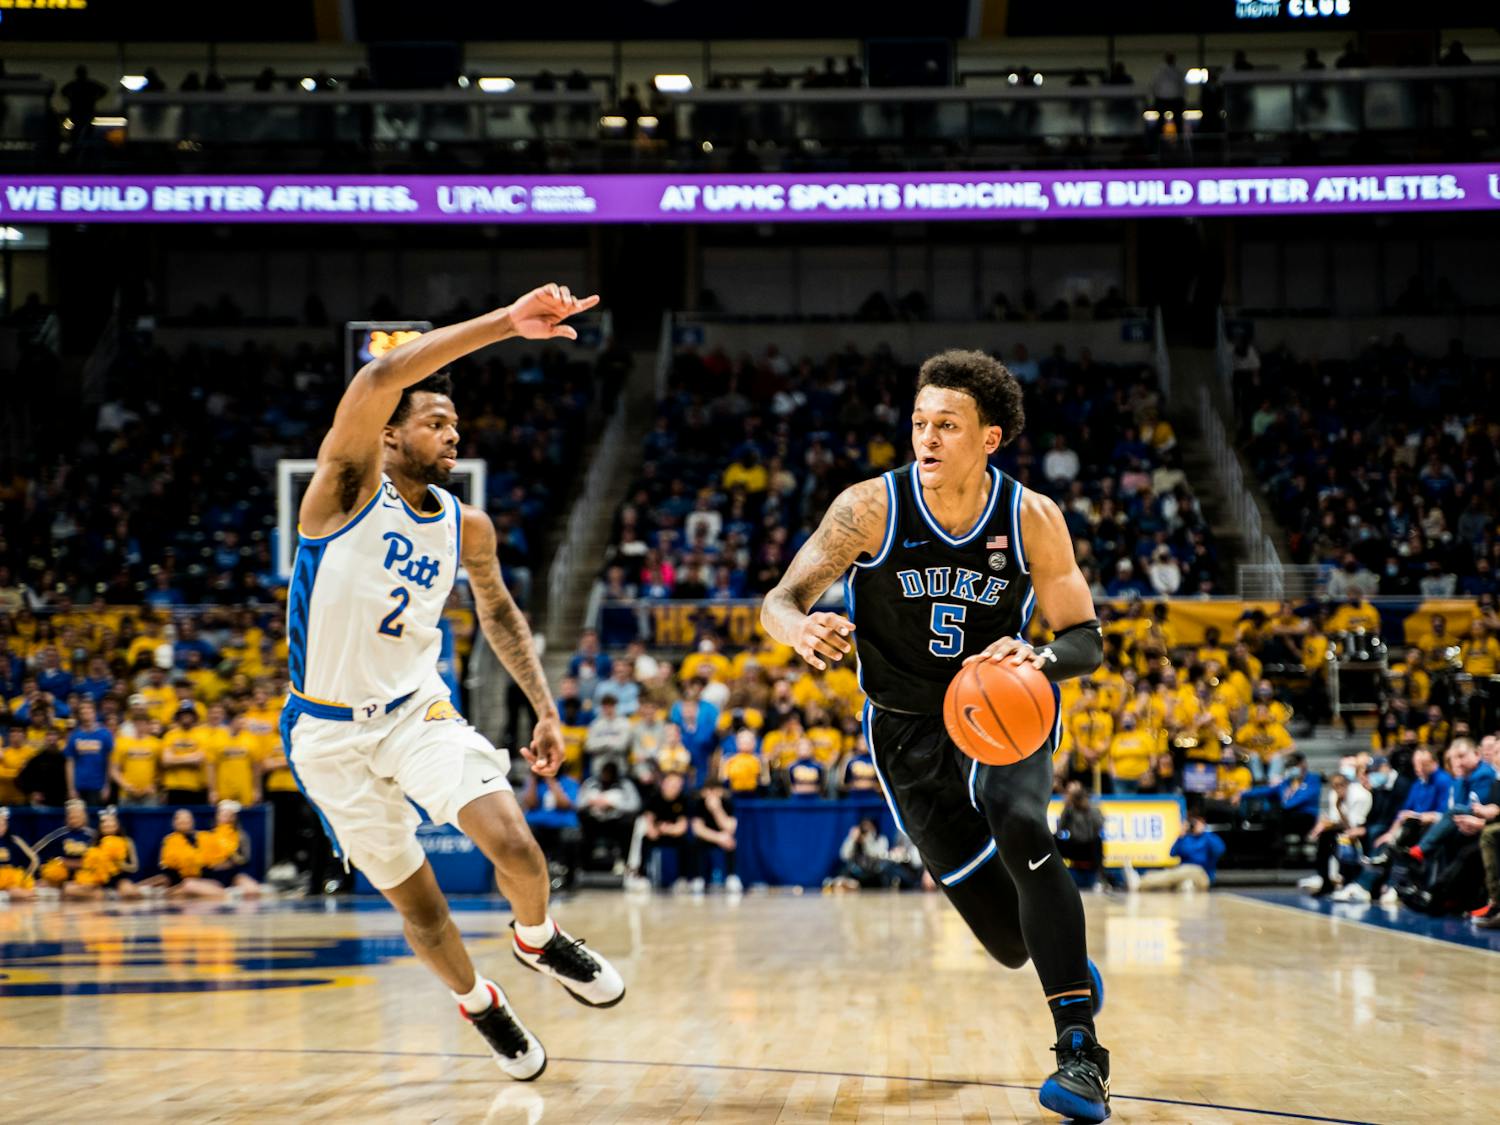 Paolo Banchero was aggressive early in Duke's first half against Pittsburgh.